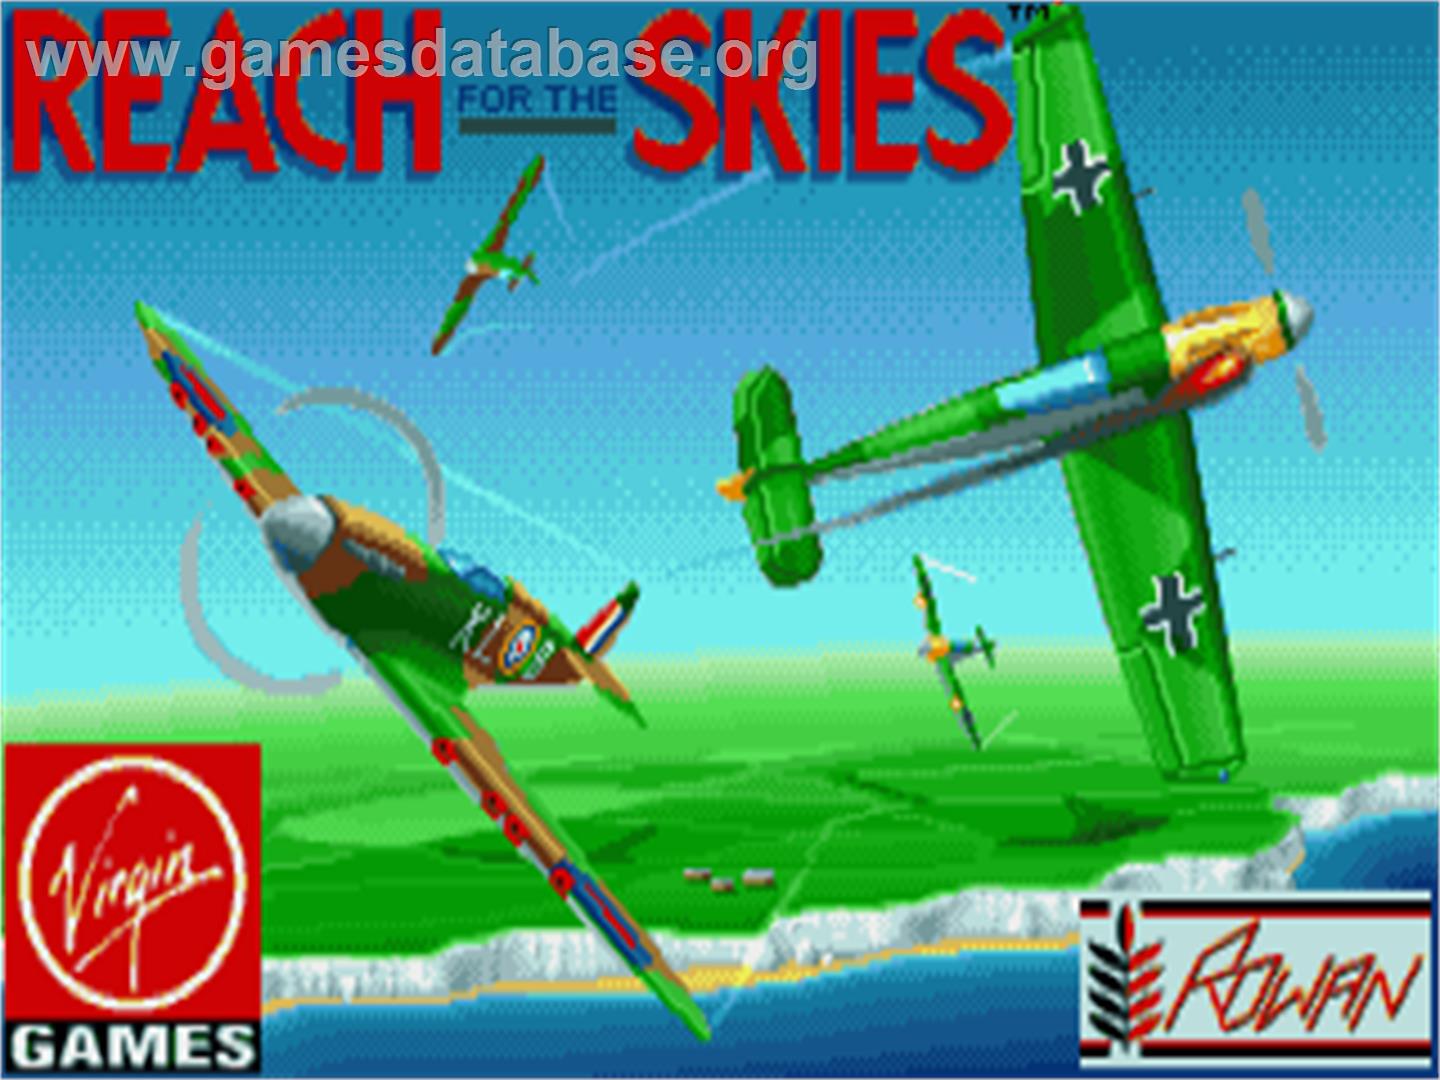 Reach for the Skies - Commodore Amiga - Artwork - Title Screen